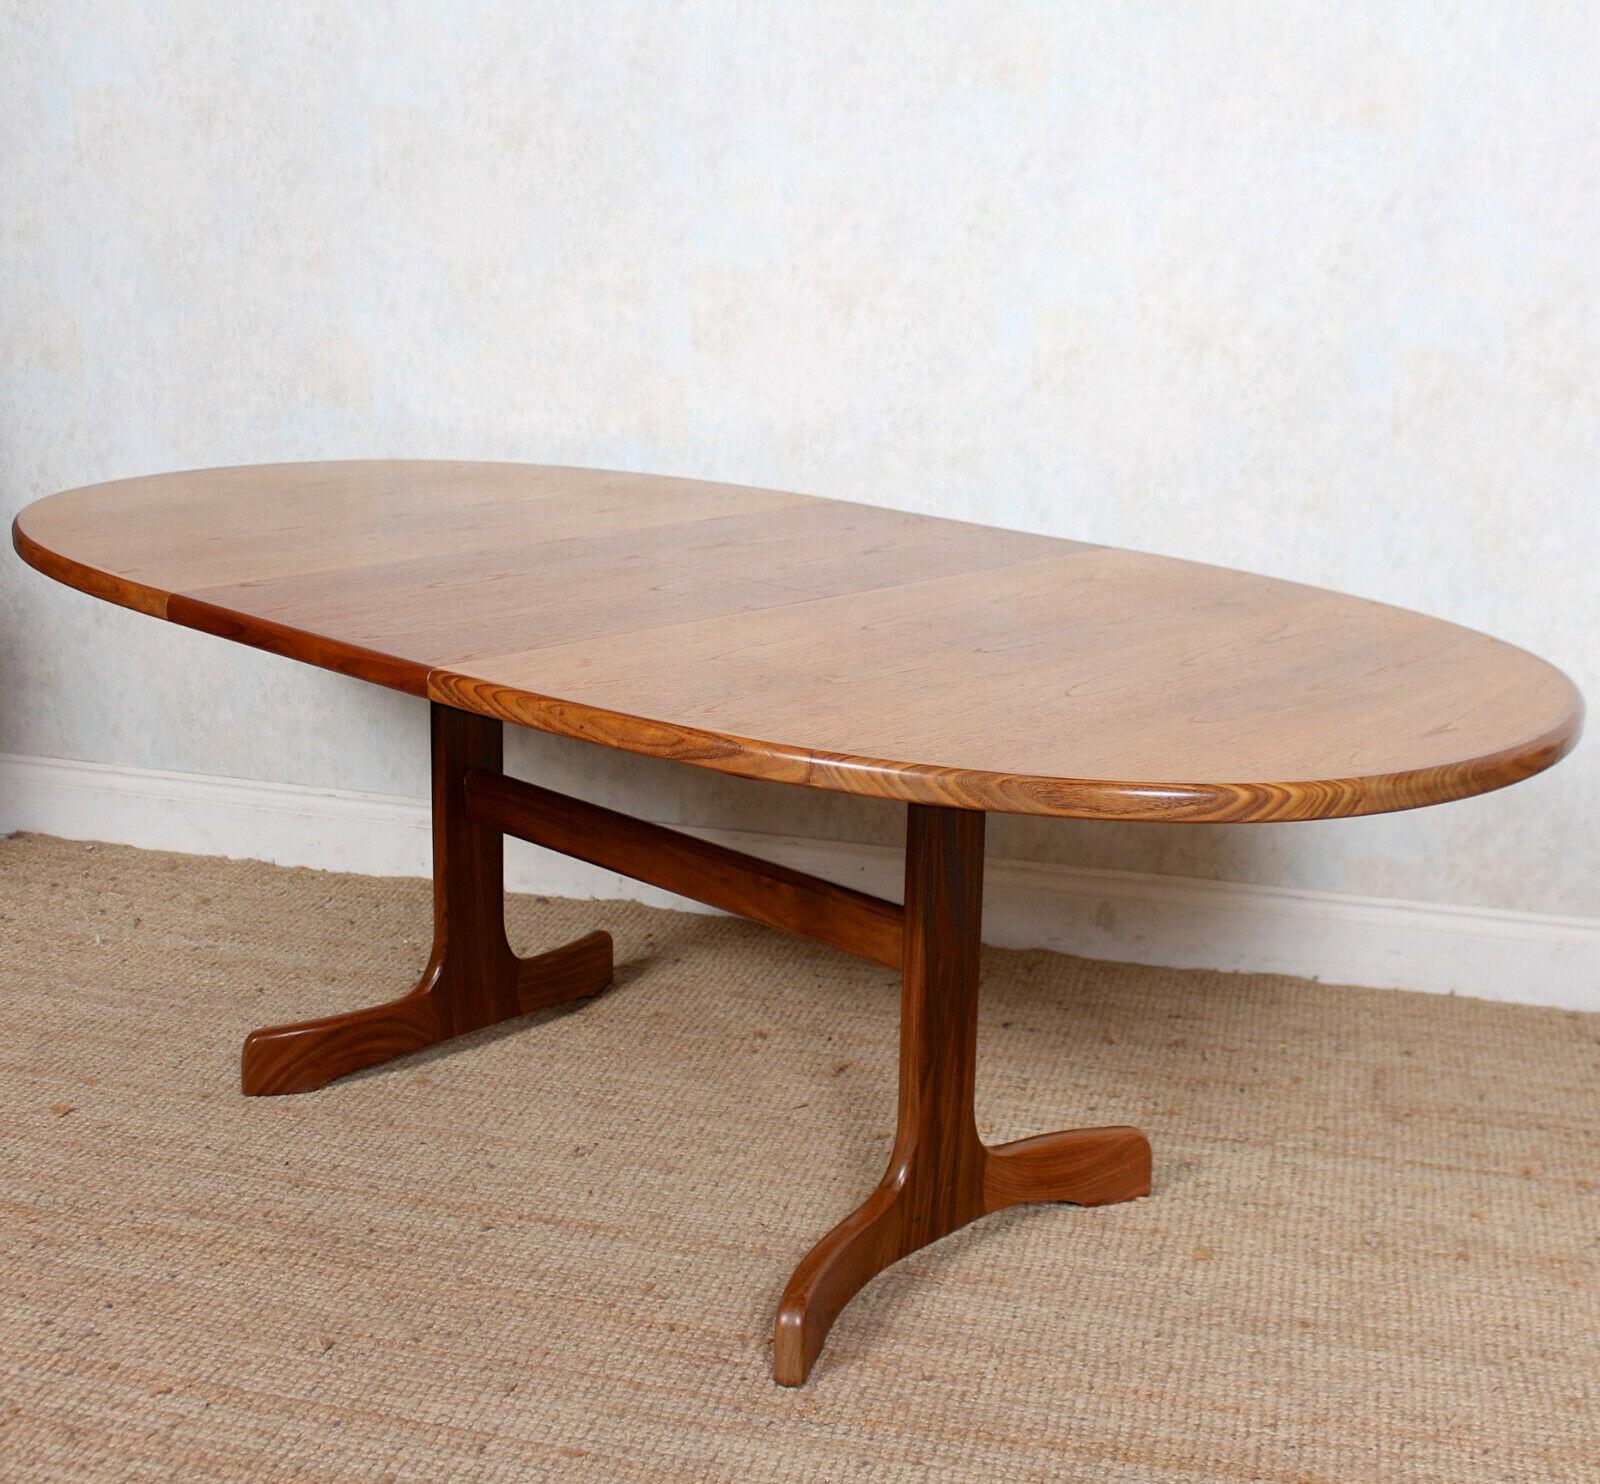 Vintage G Plan Dining Table Teak Fresco 1970s Mcm In Good Condition For Sale In Newcastle upon Tyne, GB